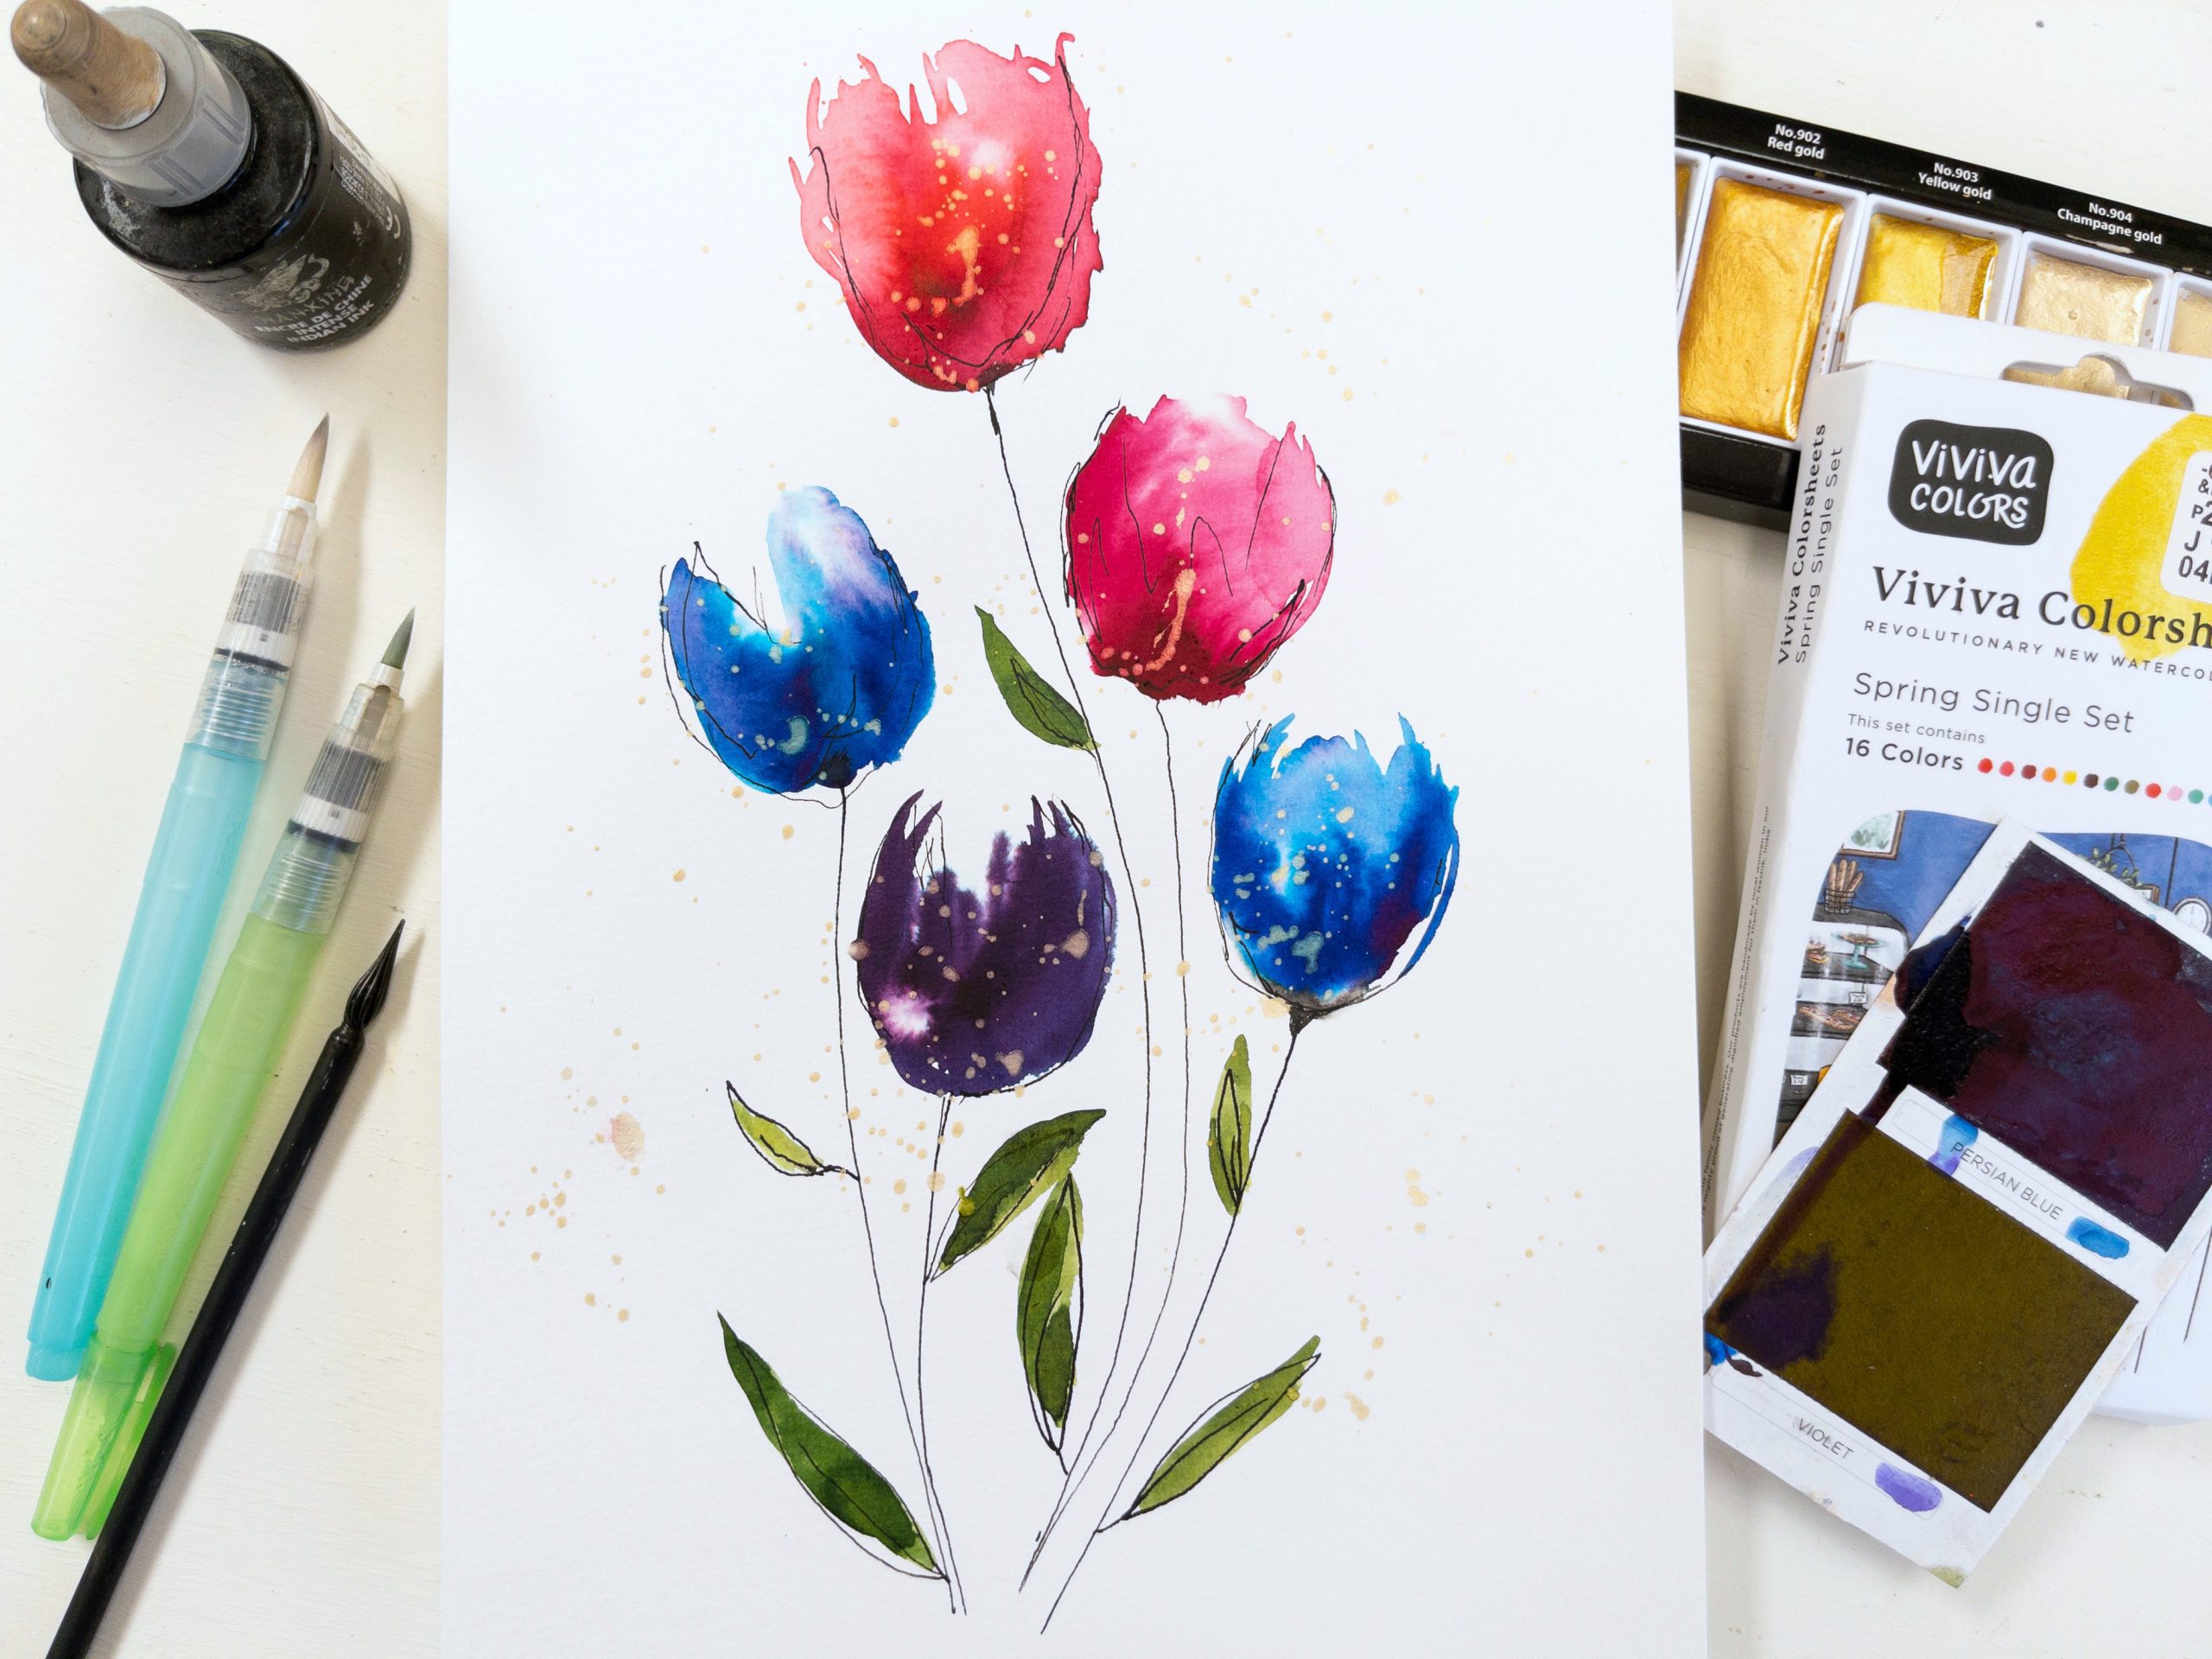 watercolor painting of flowers with Viviva colorsheets and Kuretake waterbrushes in bright colors including Kuretake Starry Colors